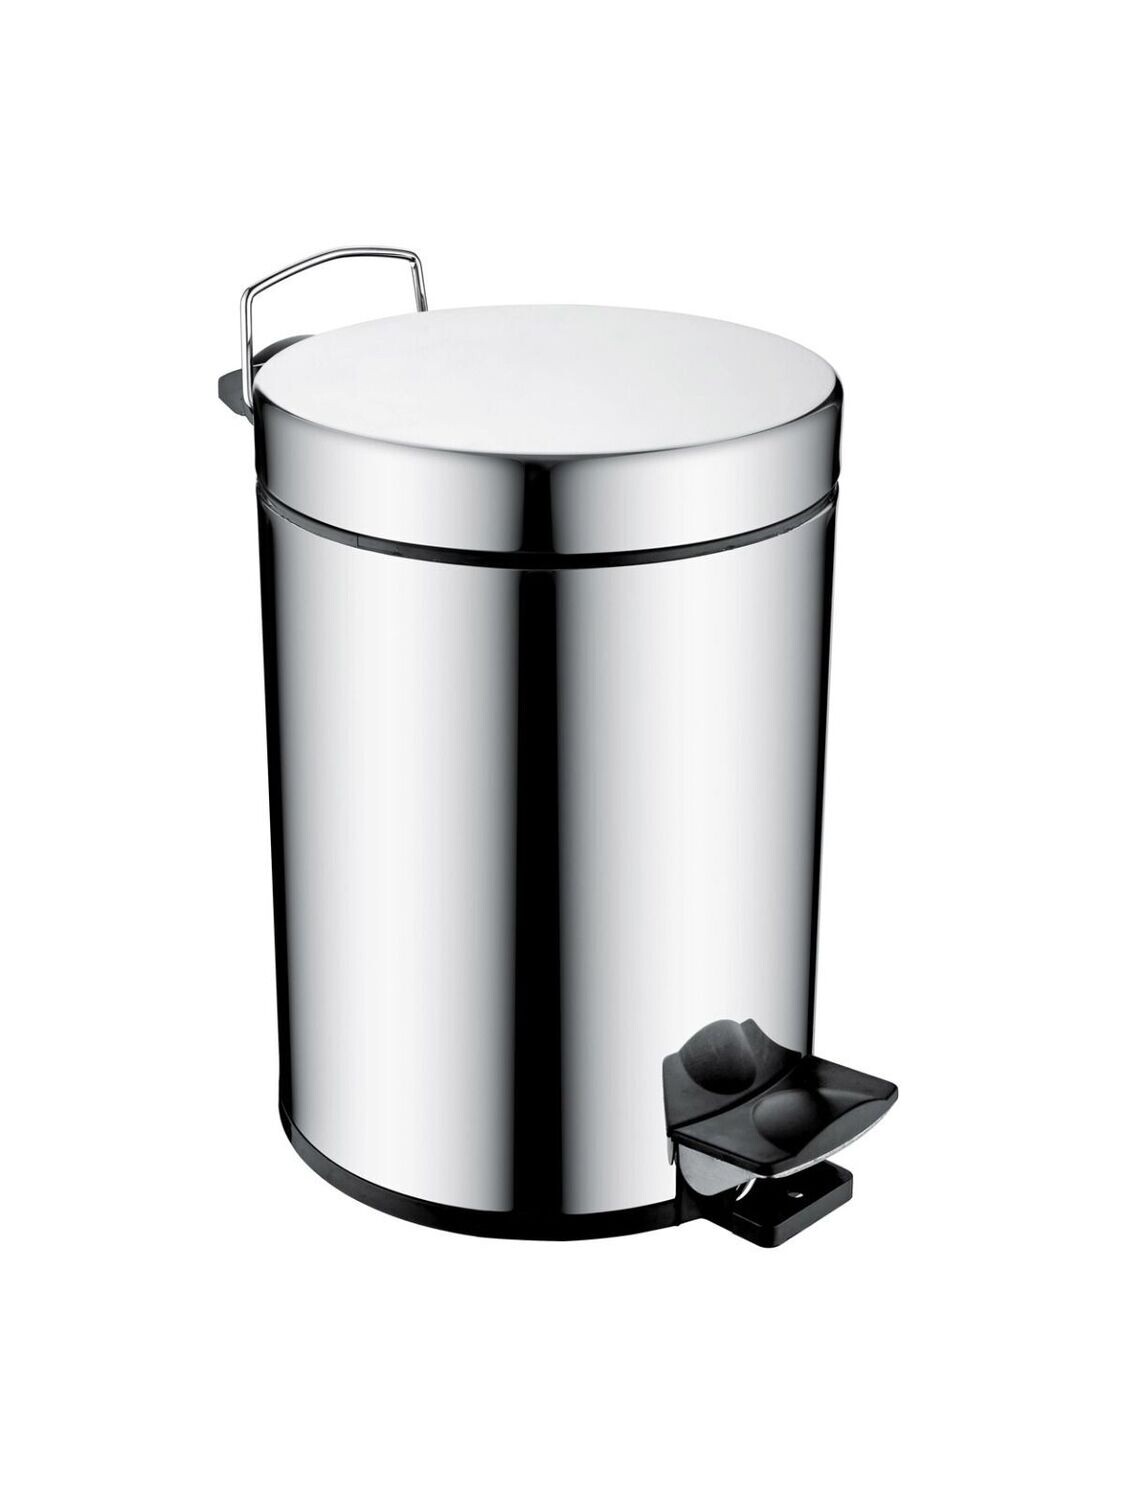 Bon appetit 12L stainless steel Pedal bin Chrome 12L Bathroom, Bedroom, Office, Mini Garbage can with Foot Pedal for Small Space,